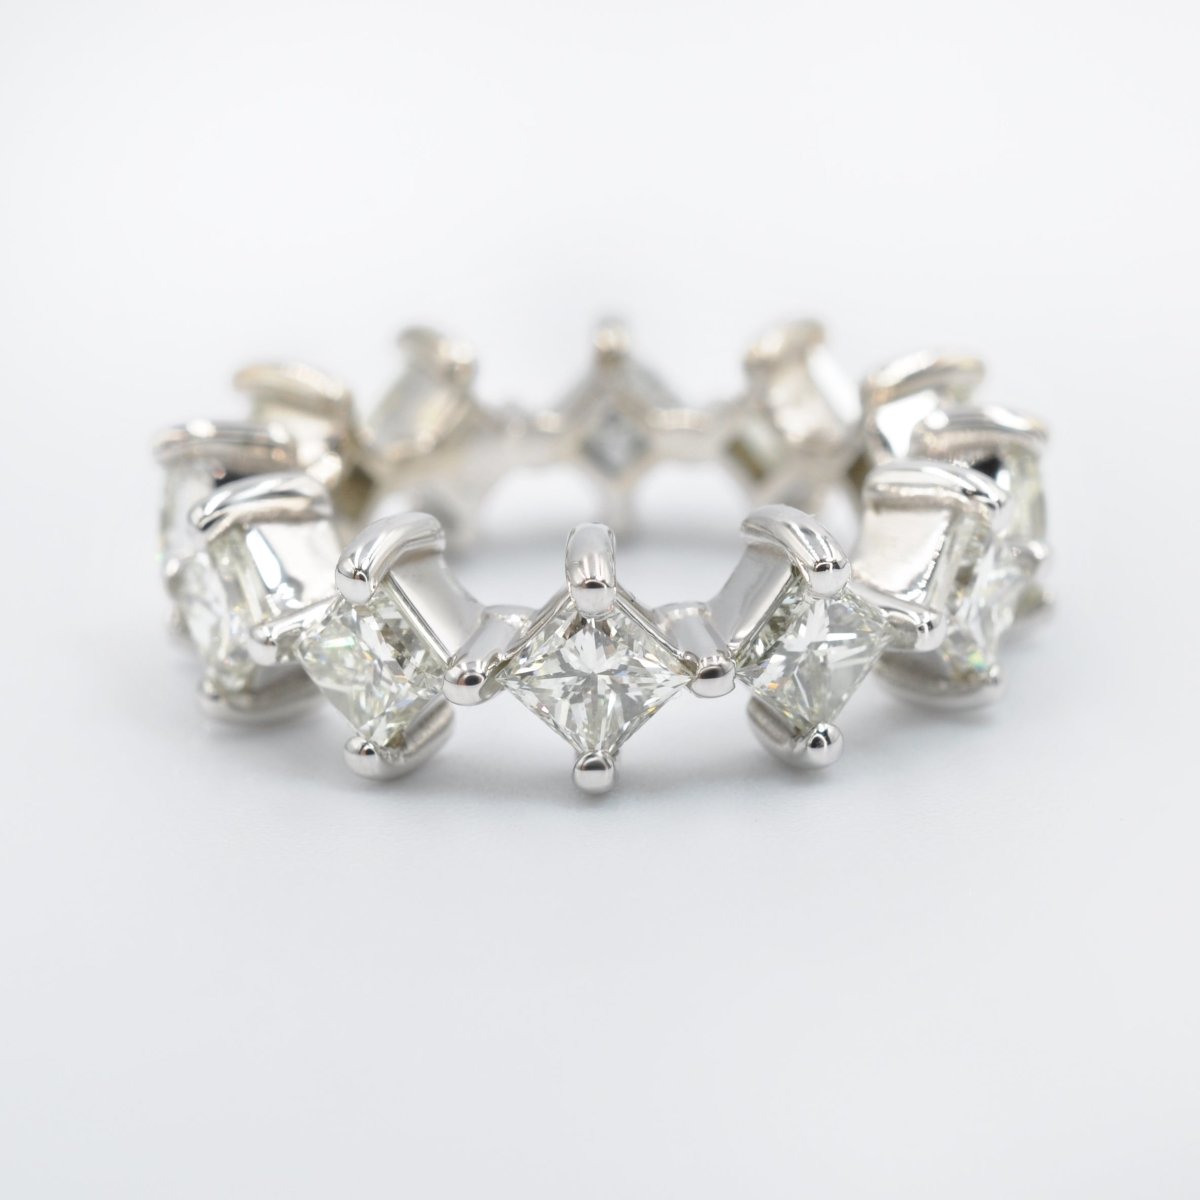 Certified 4.20 CT Princess Cut Diamond Eternity Ring in 18 KT White Gold - Primestyle.com